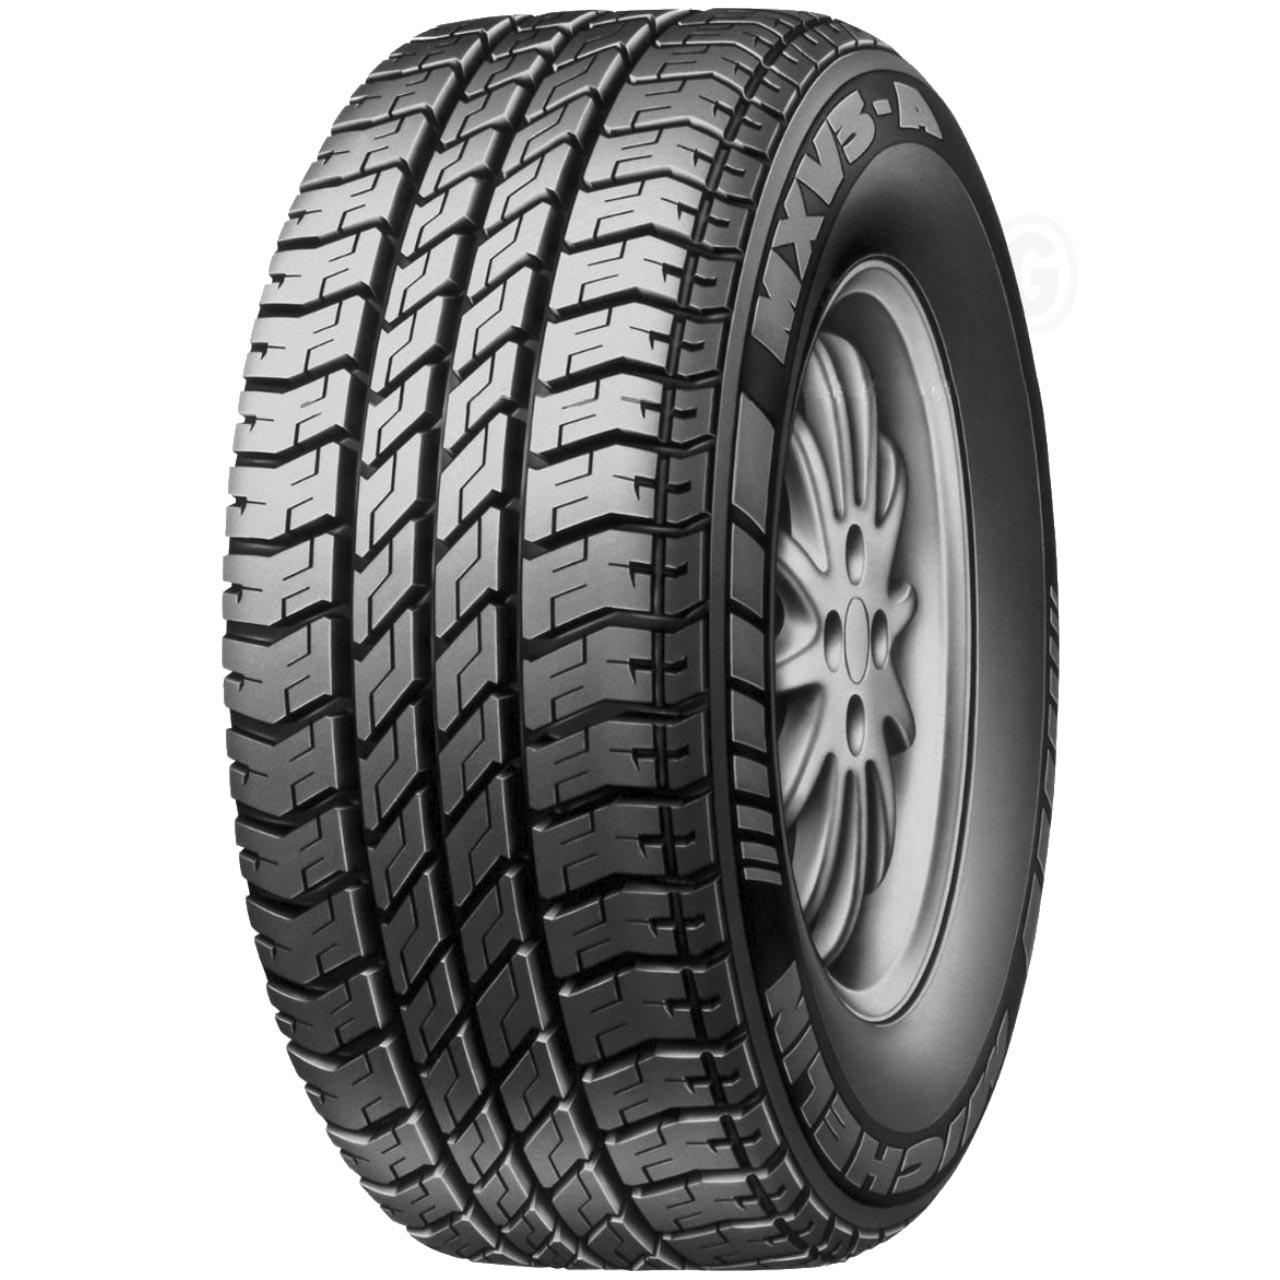 MICHELIN MXV3 A